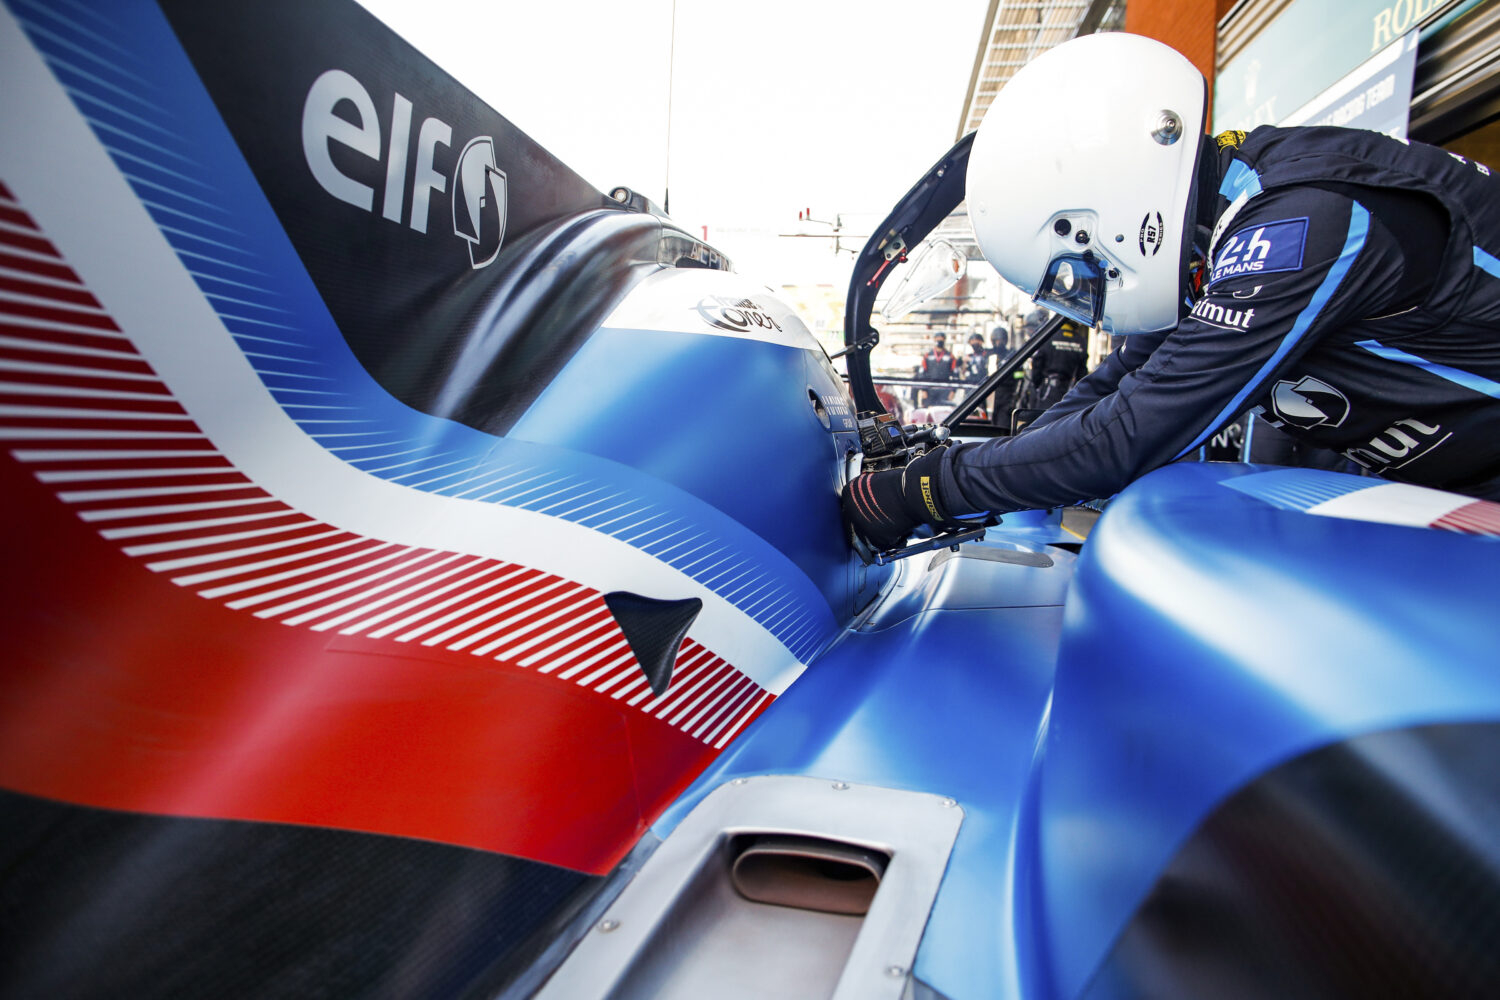 2021 - Story - Alpine: When the car talks to the engineers